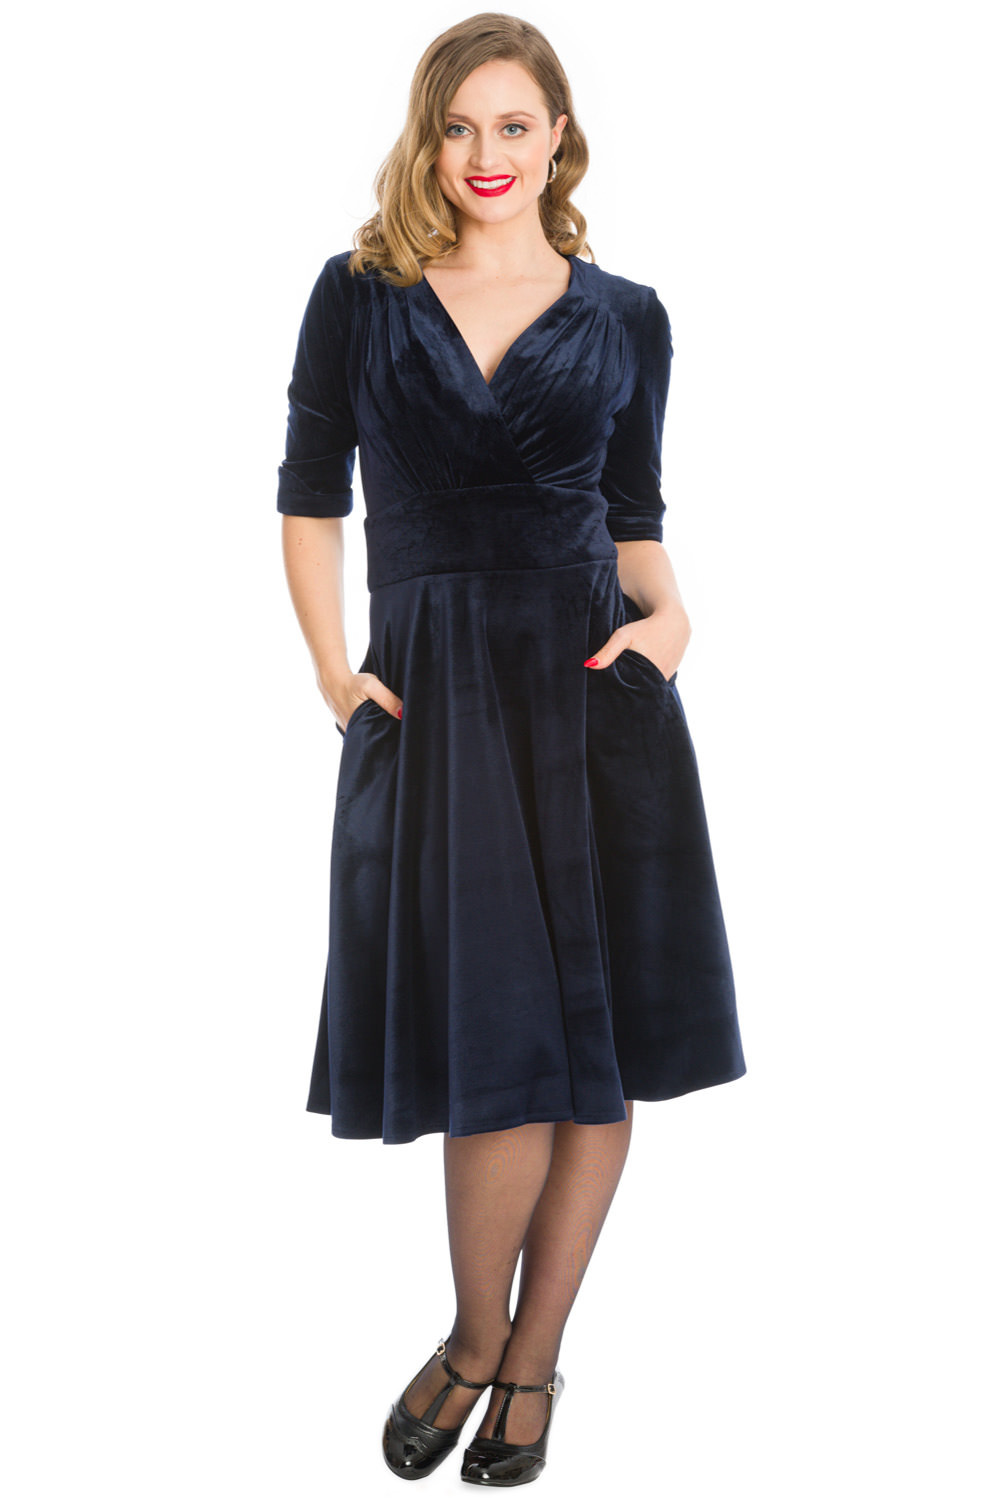 Banned Retro 50s Date Night Fit And Flare Dress In Navy | Free UK P&P